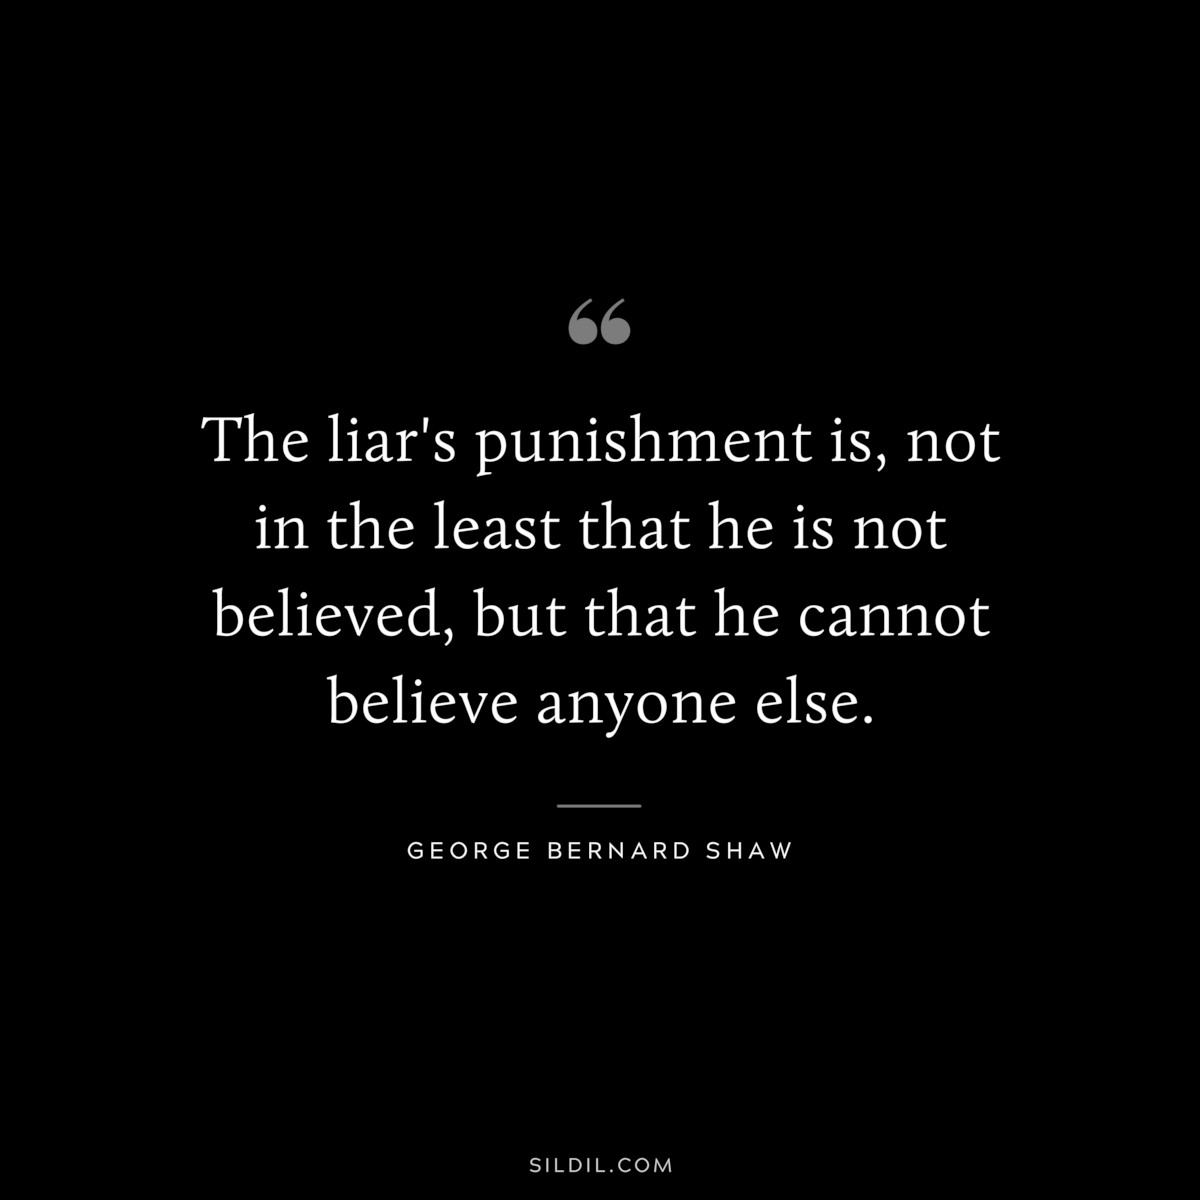 The liar's punishment is, not in the least that he is not believed, but that he cannot believe anyone else. ― George Bernard Shaw